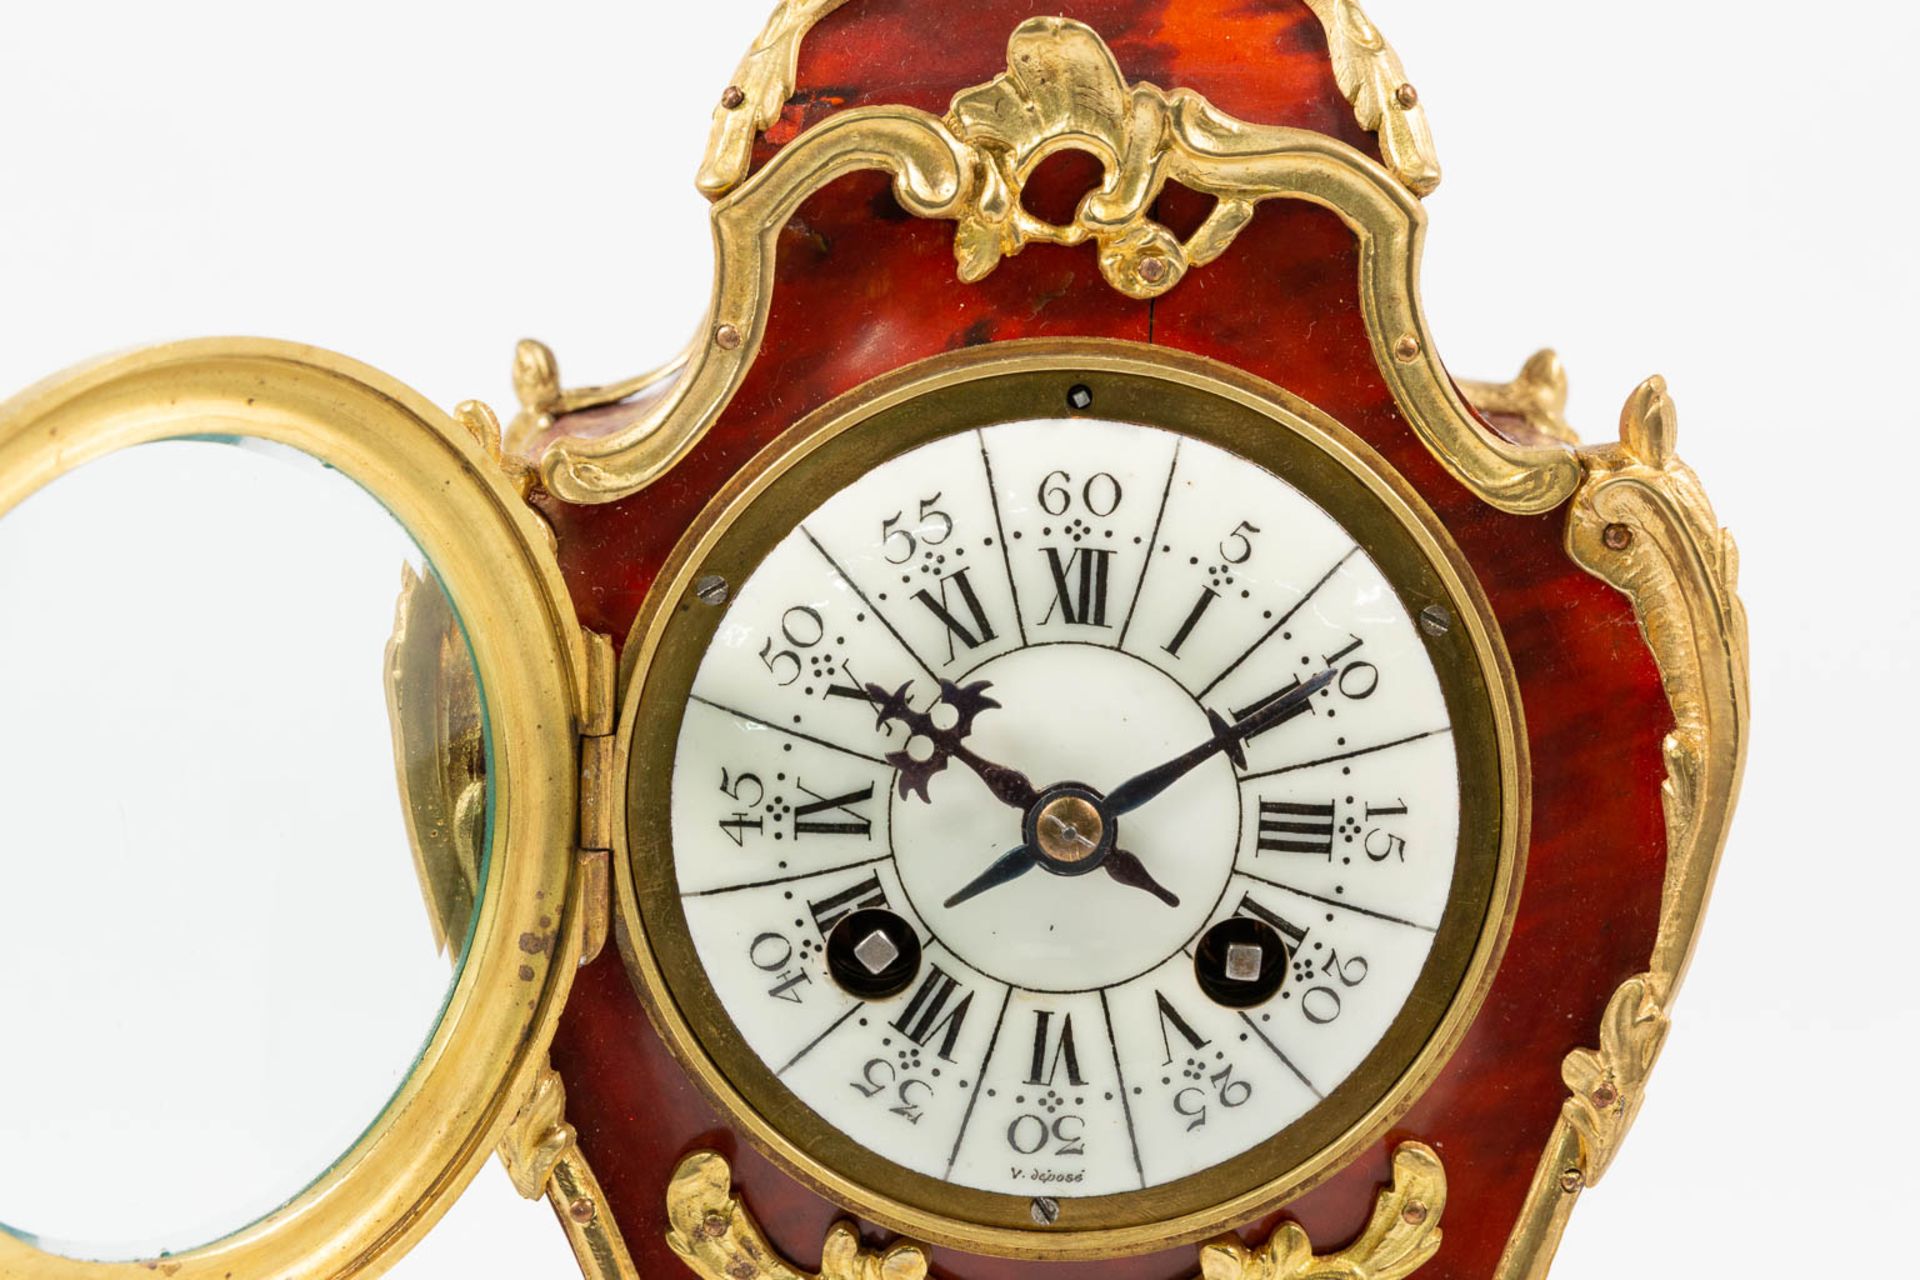 A Table clock made of wood decorated with Tortoise shell and Mount - Image 12 of 16